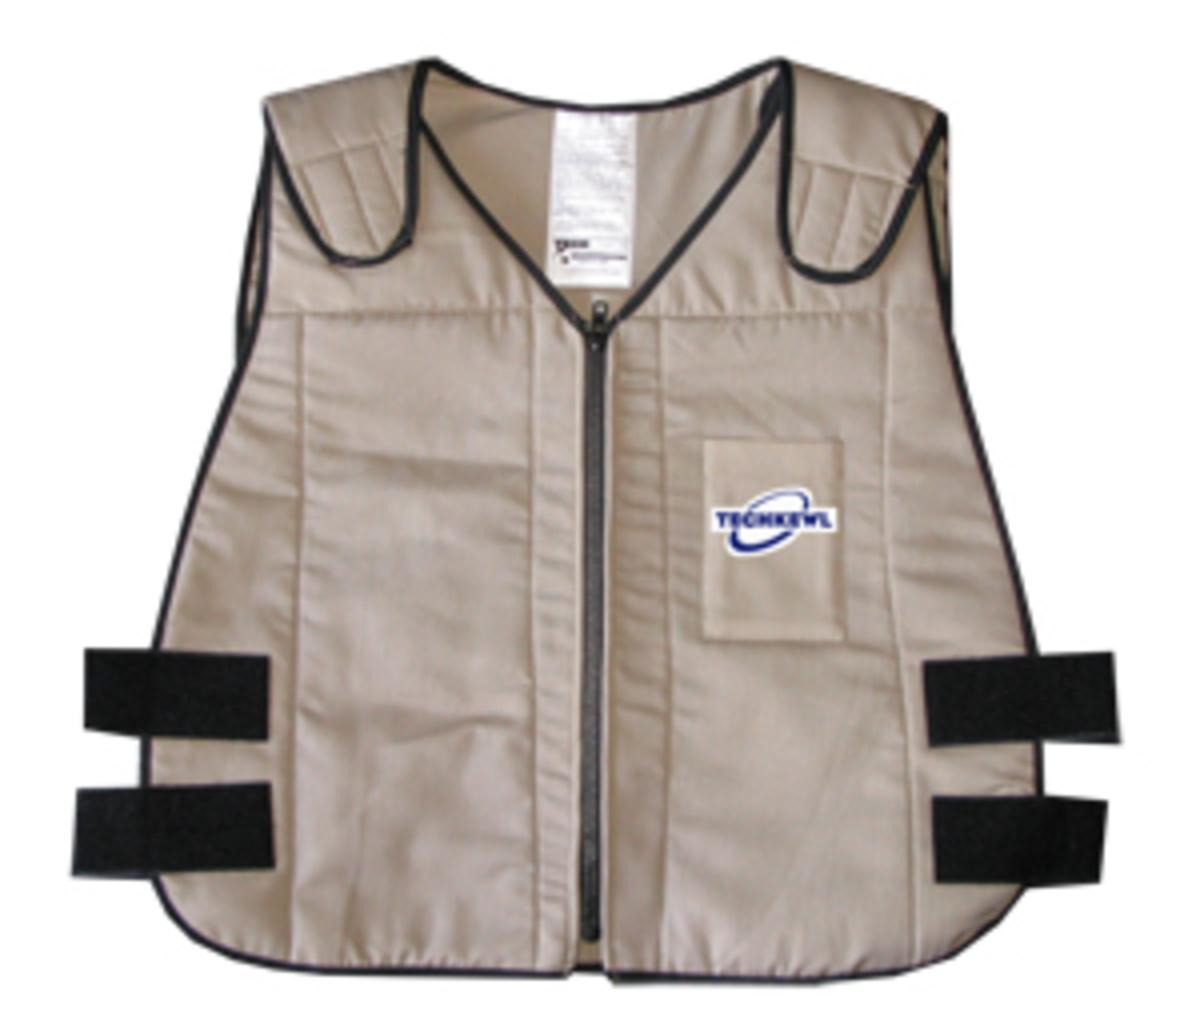 Techniche TechKewl Phase Change Cooling Vest with Inserts and Cooler - Khaki